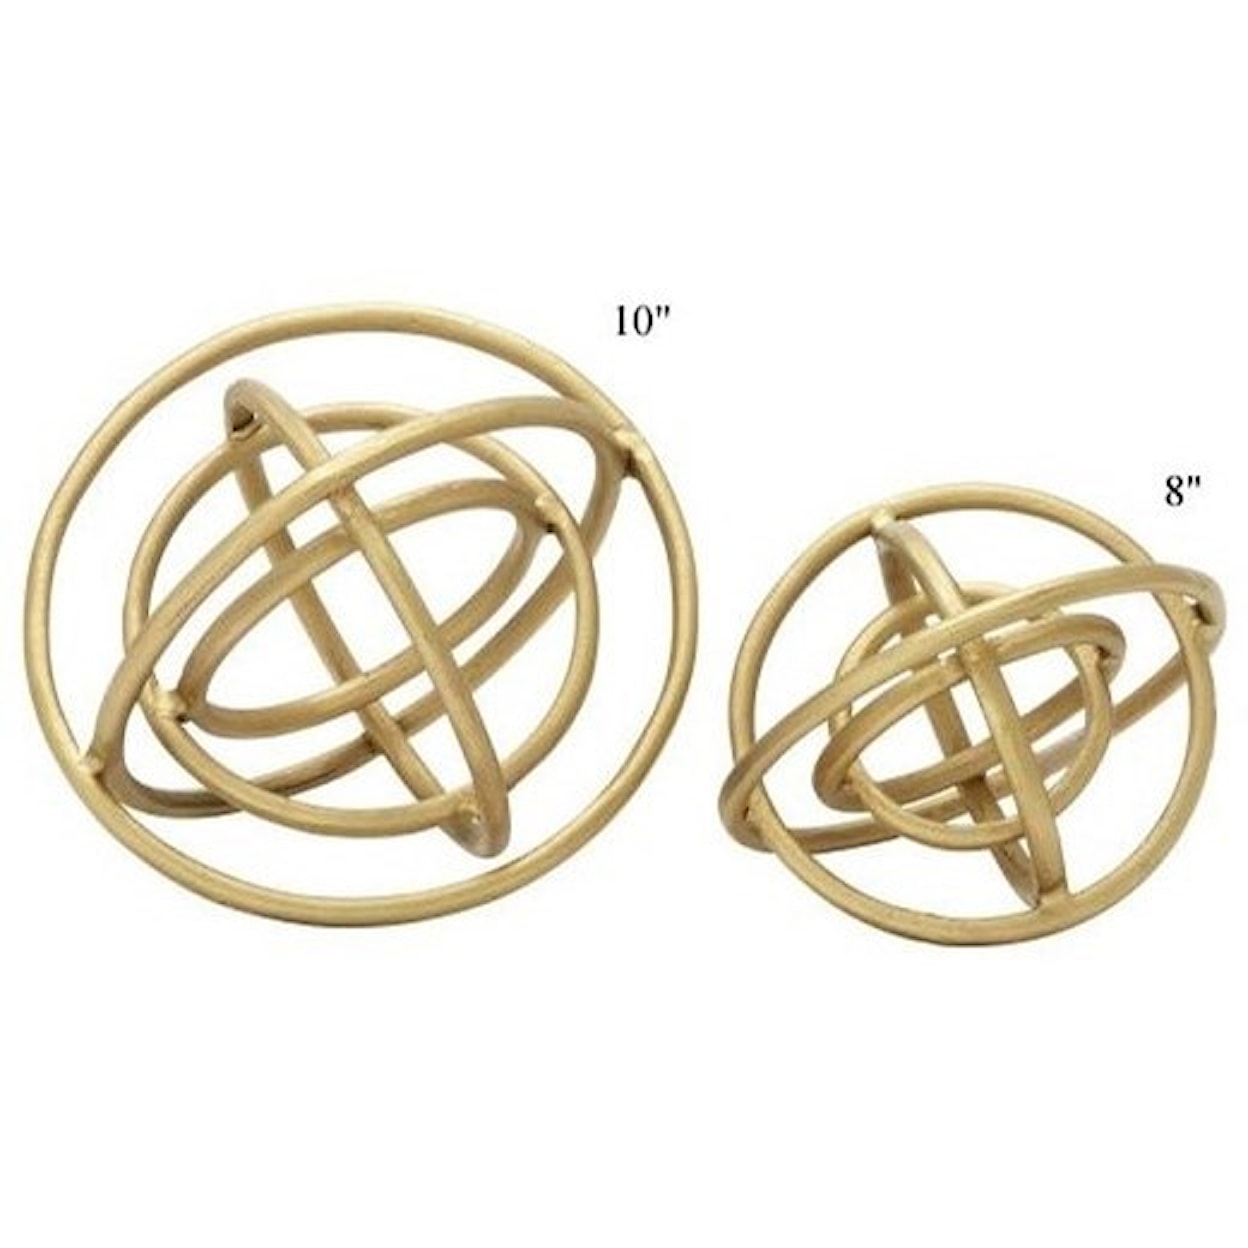 Will's Company Accents Set of 2 Ring Orbs - 8" & 10"